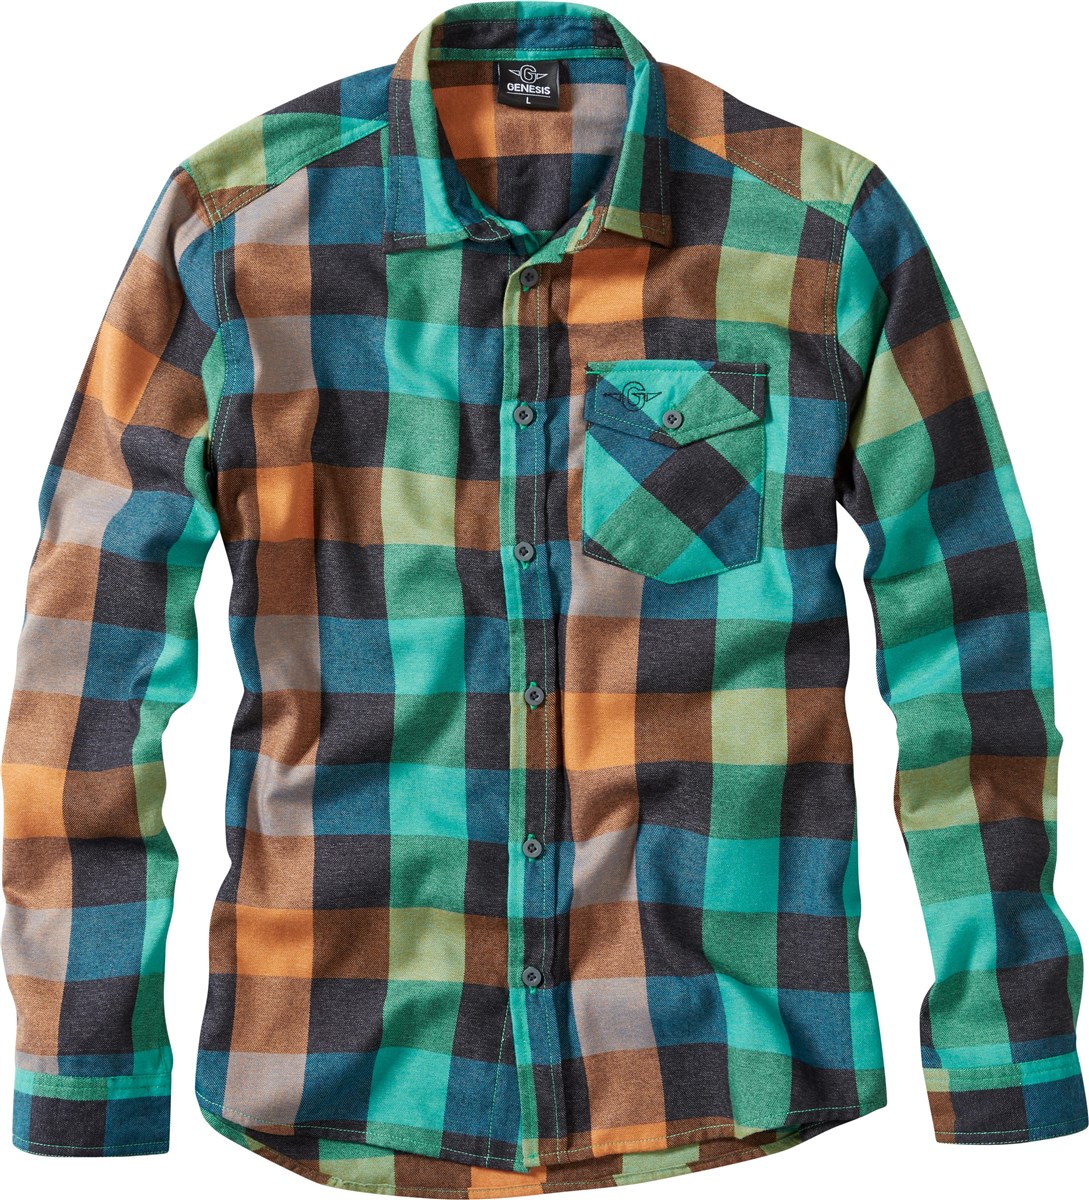 Genesis Flannel Shirt product image